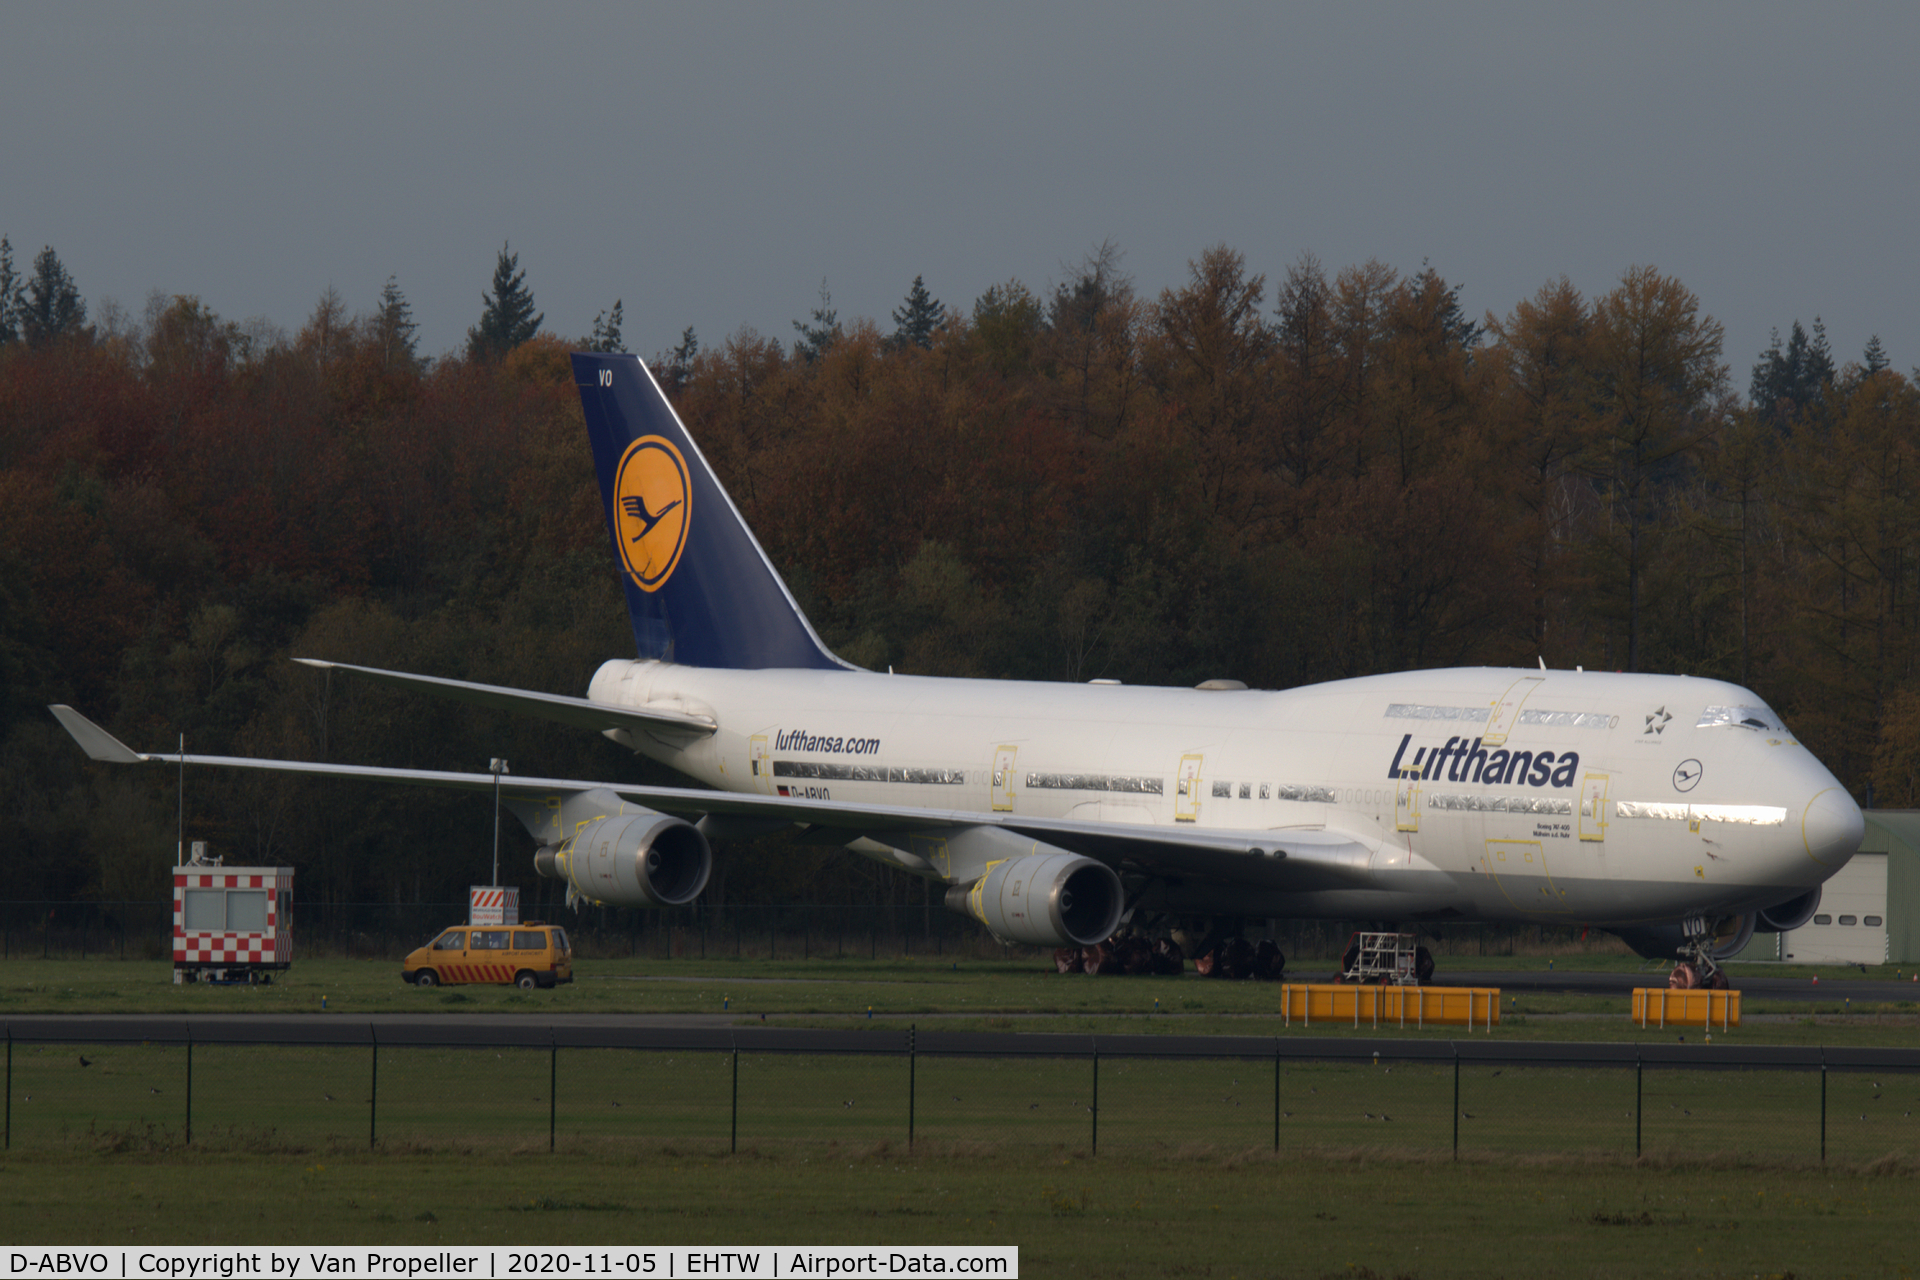 D-ABVO, 1996 Boeing 747-430 C/N 28086, Lufthansa Boeing 747-430 in storage at Twente airport, the Netherlands, due to the Covid-19 pandemic